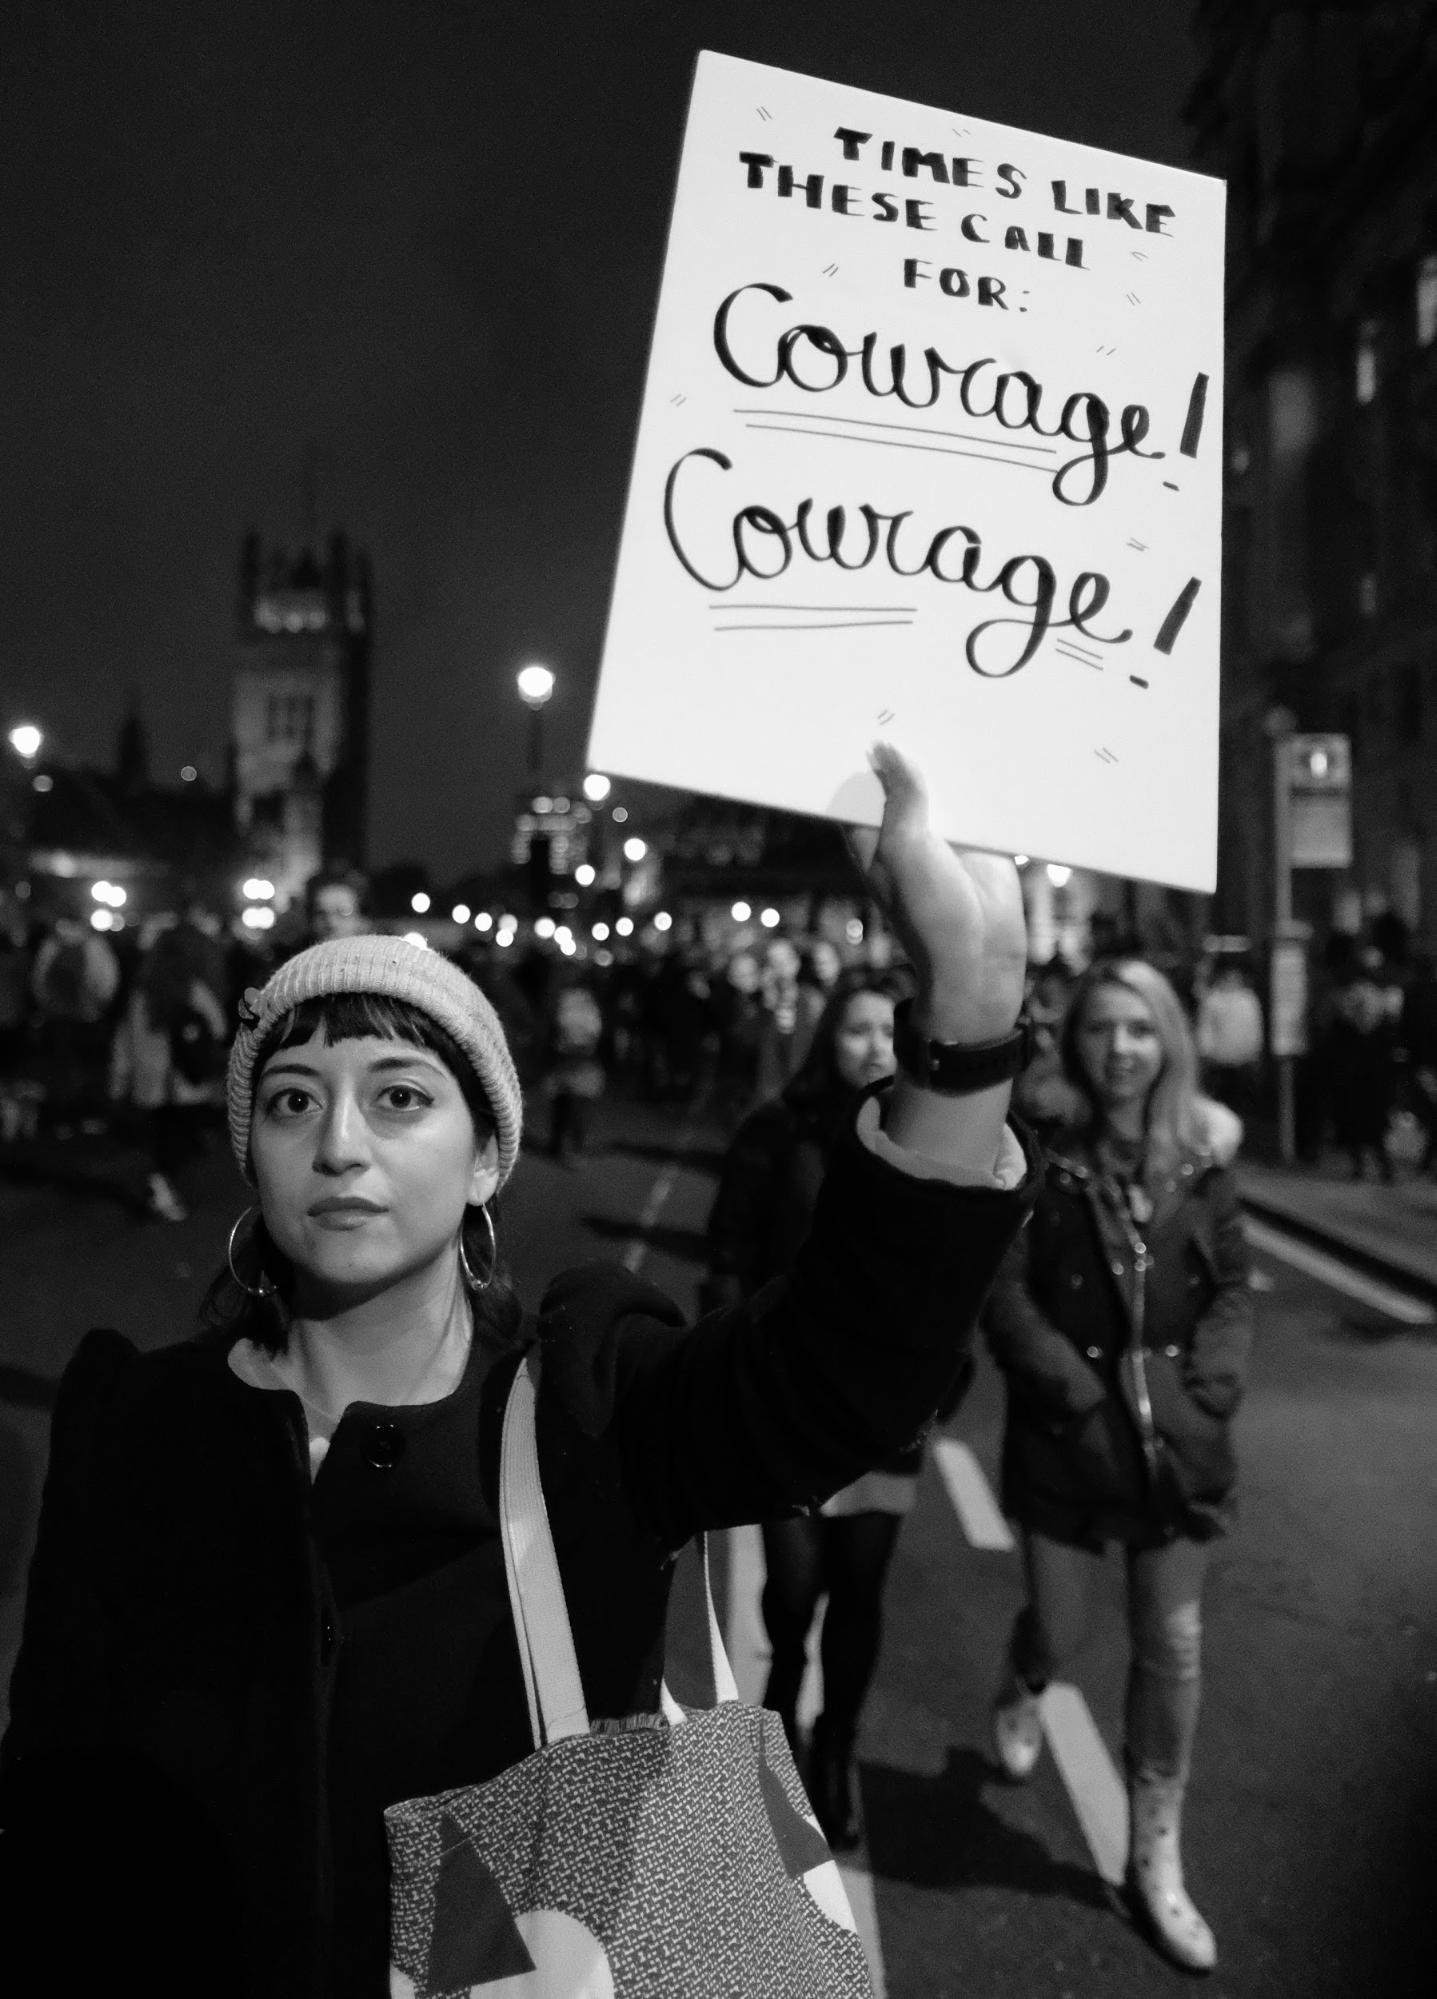 A woman in a march holds a sign saying "Times like these call for courage!Courage!"